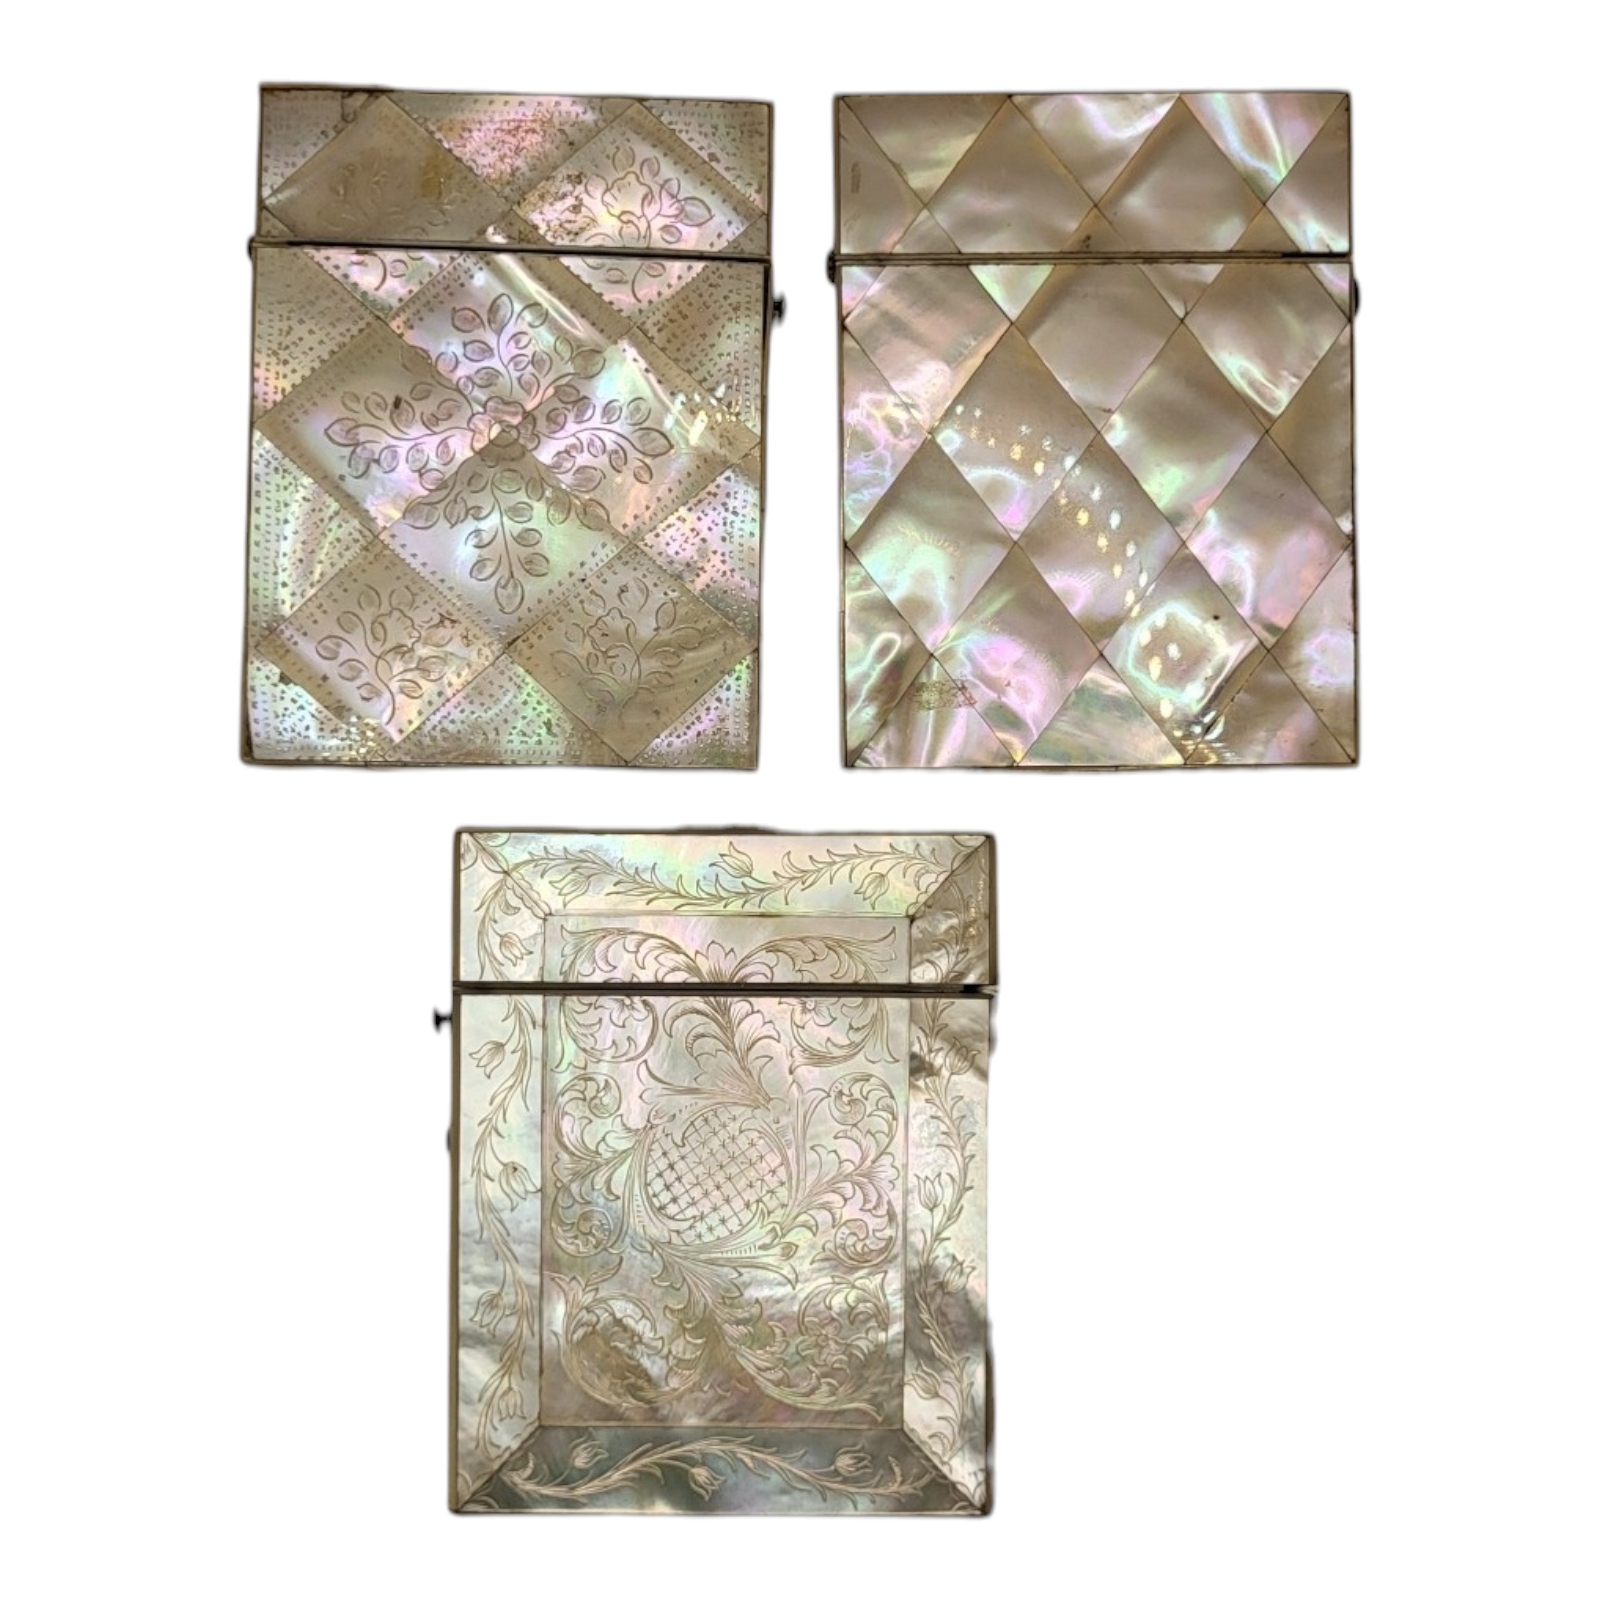 A COLLECTION OF THREE 19TH CENTURY MOTHER OF PEARL CALLING CARD CASES To include a case with fine